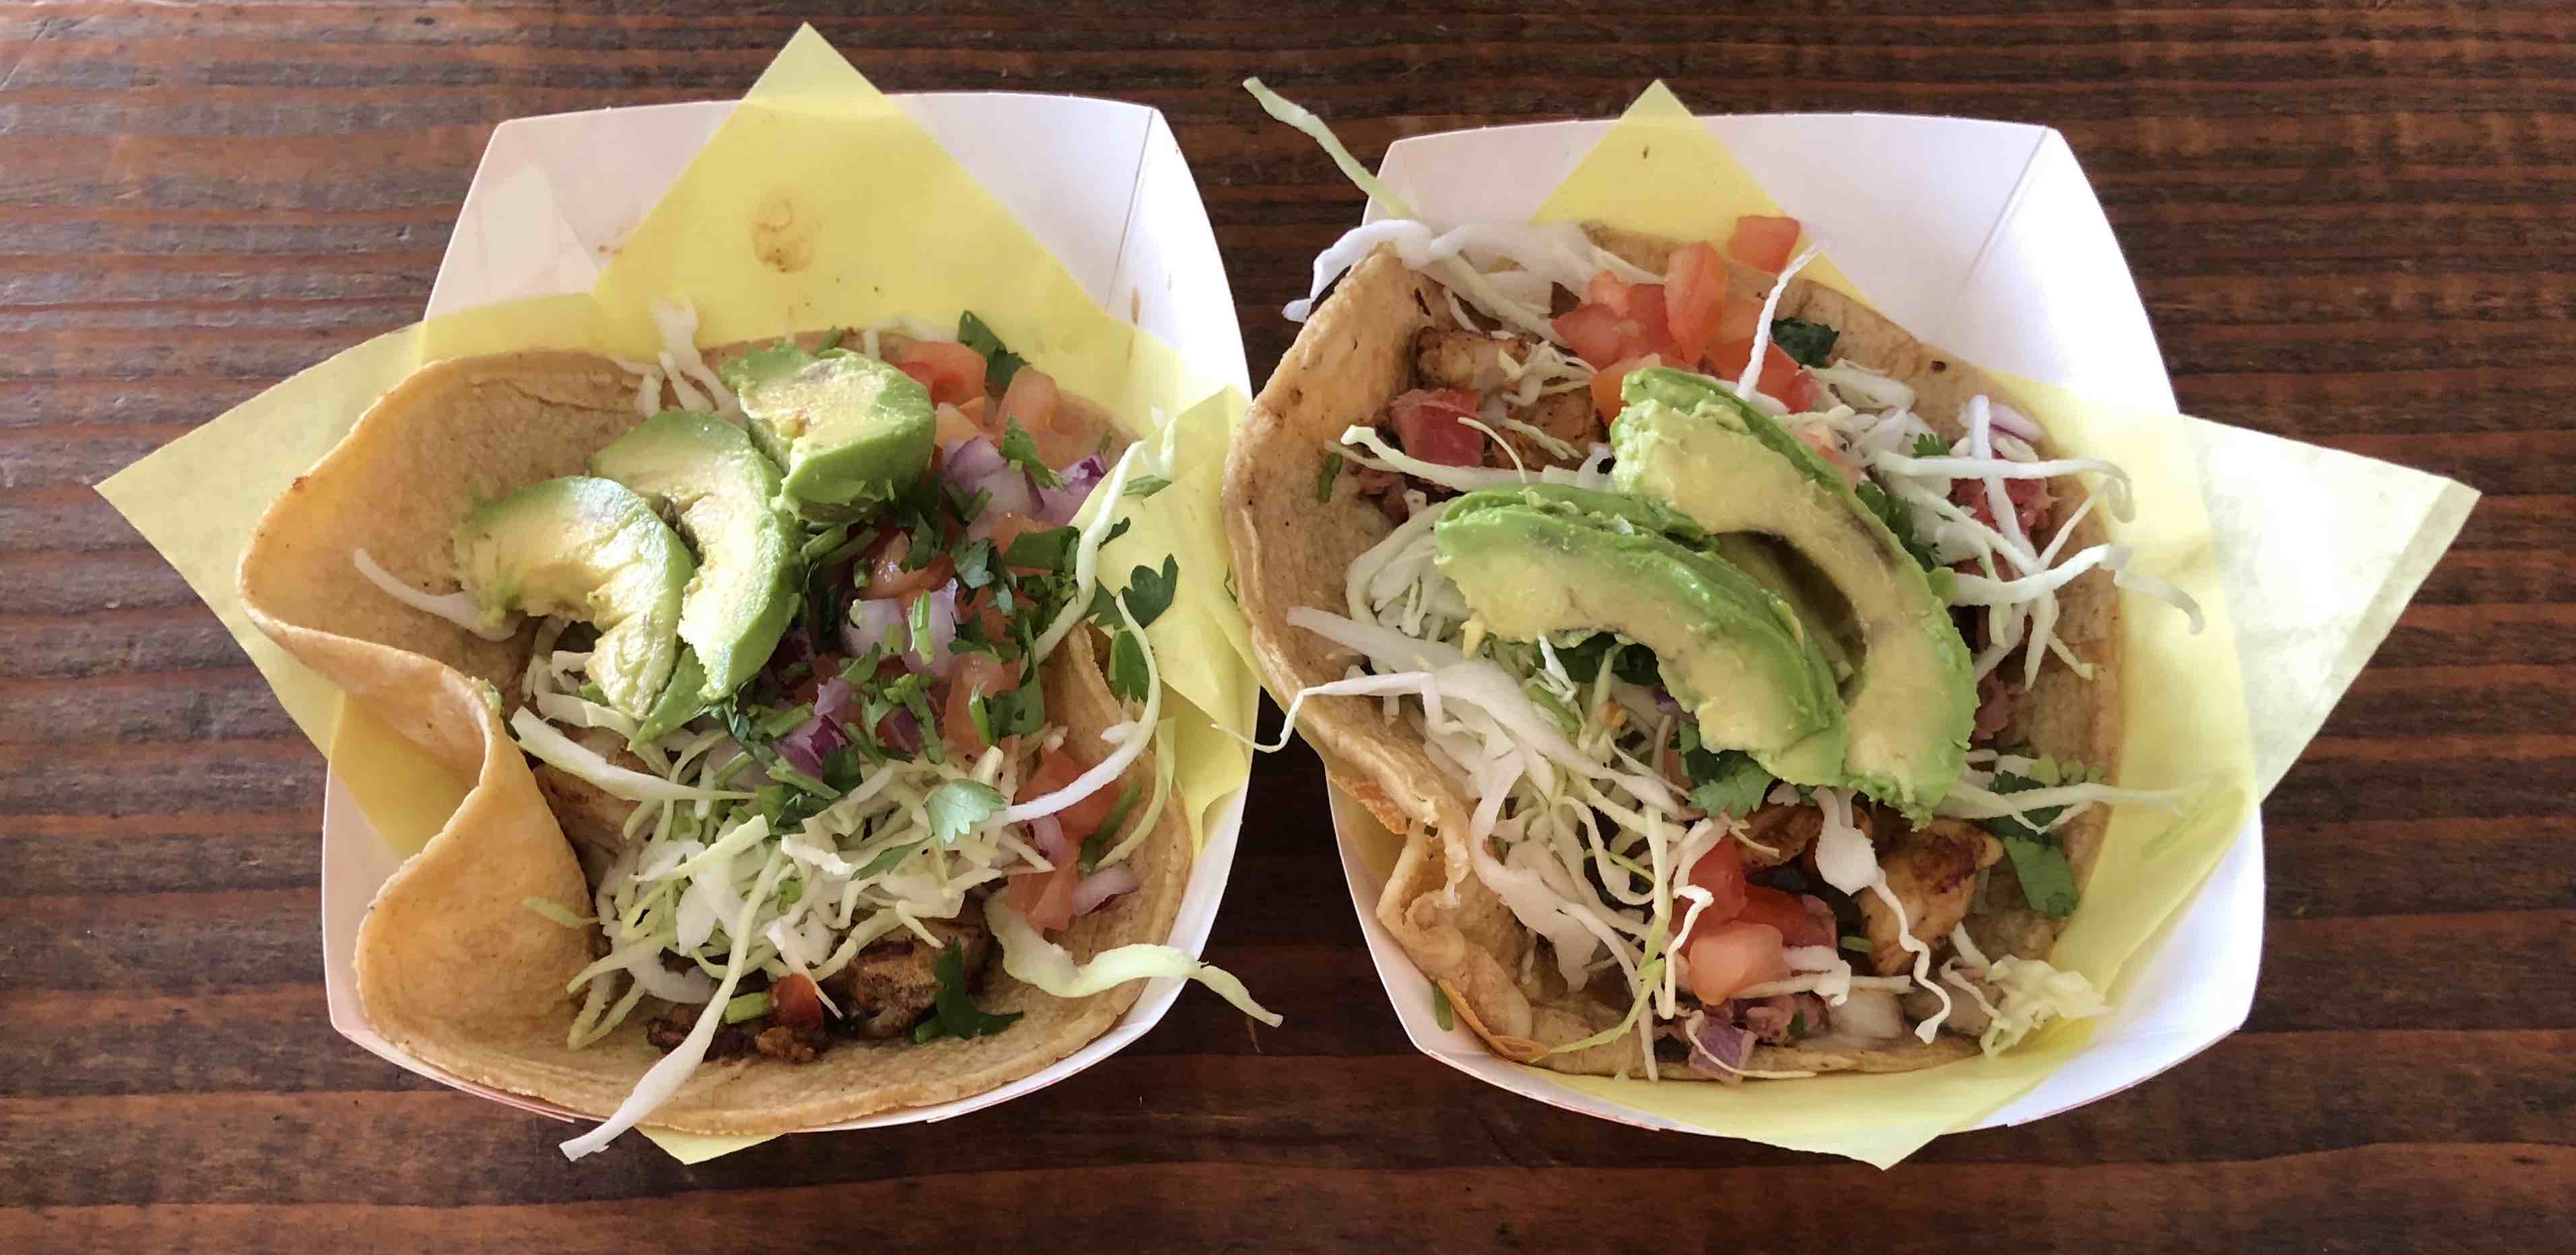 Two fish tacos from Oscar's in San Diego, California